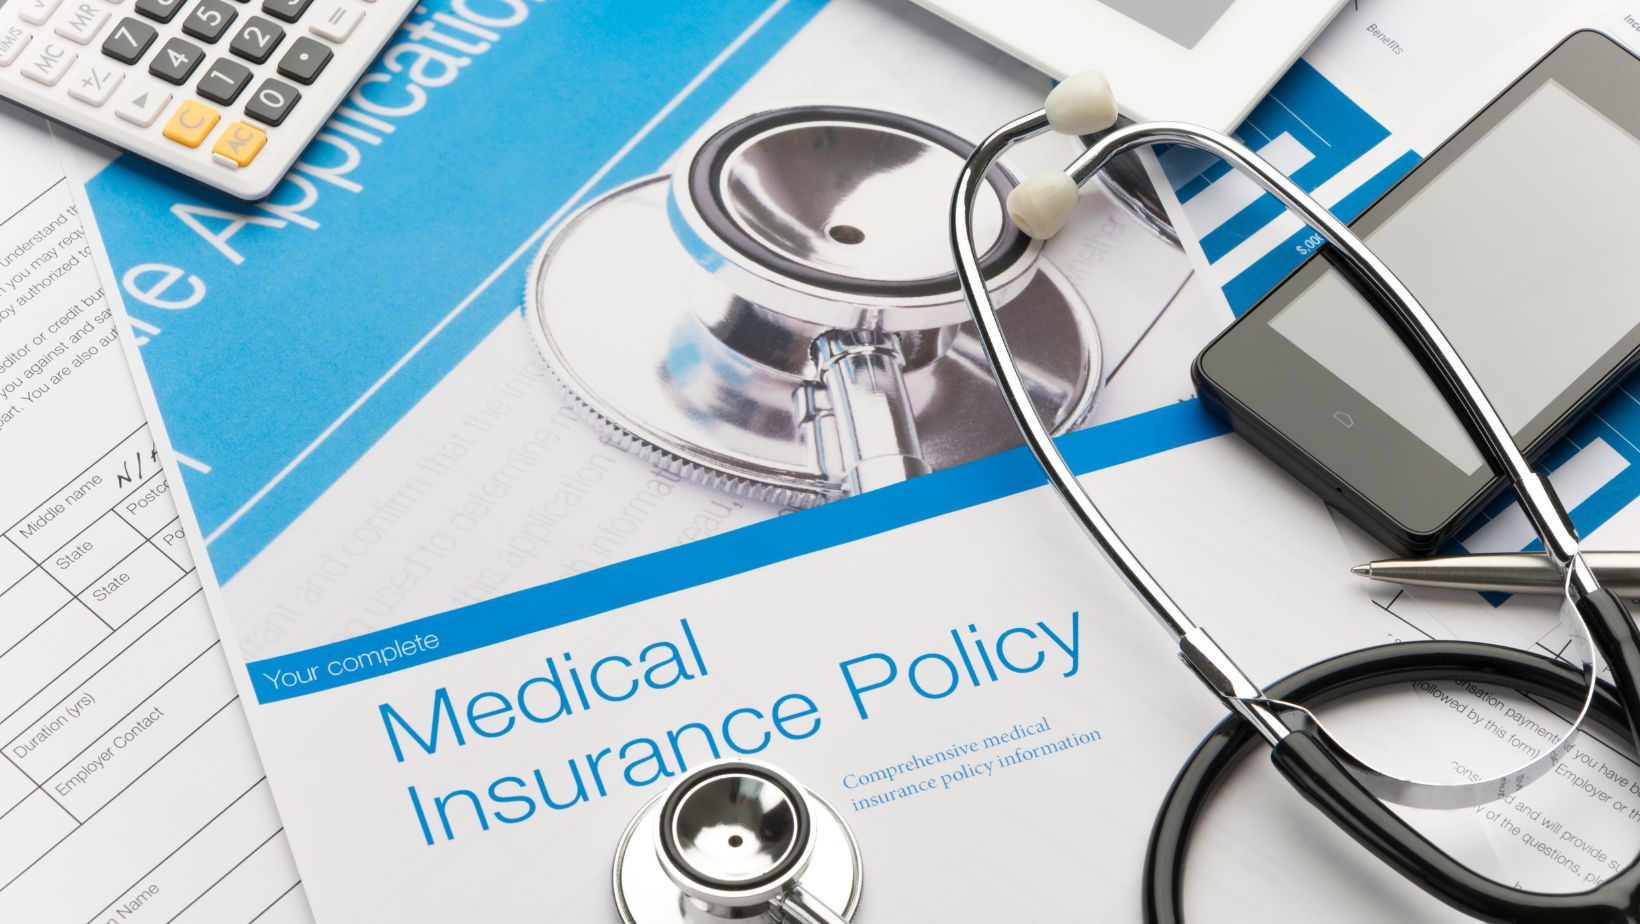 which of the following is typically not eligible for coverage in a group health policy